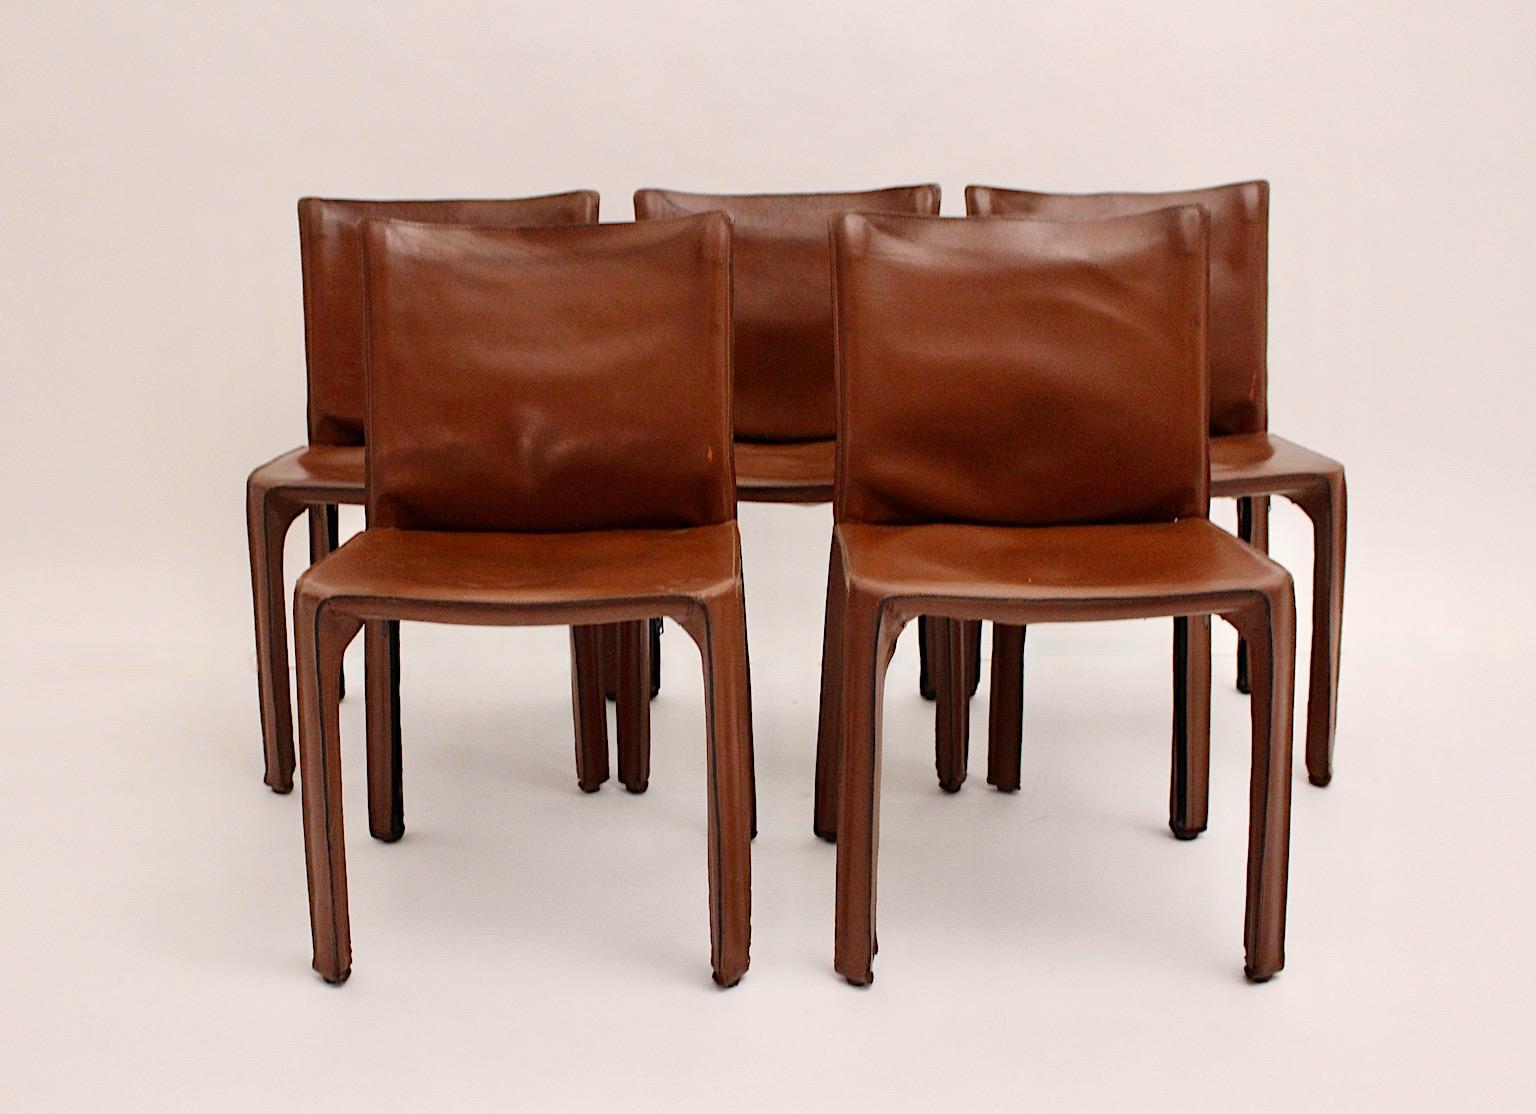 Modern set of 5 vintage Cab 412 dining room chairs or chairs designed by Mario Bellini for Cassina 1976 Italy from cognac brown ( aged and patinated china red sattle ) leather.
Thick leather covers a metal skeleton and features zipped feet.
Stable,